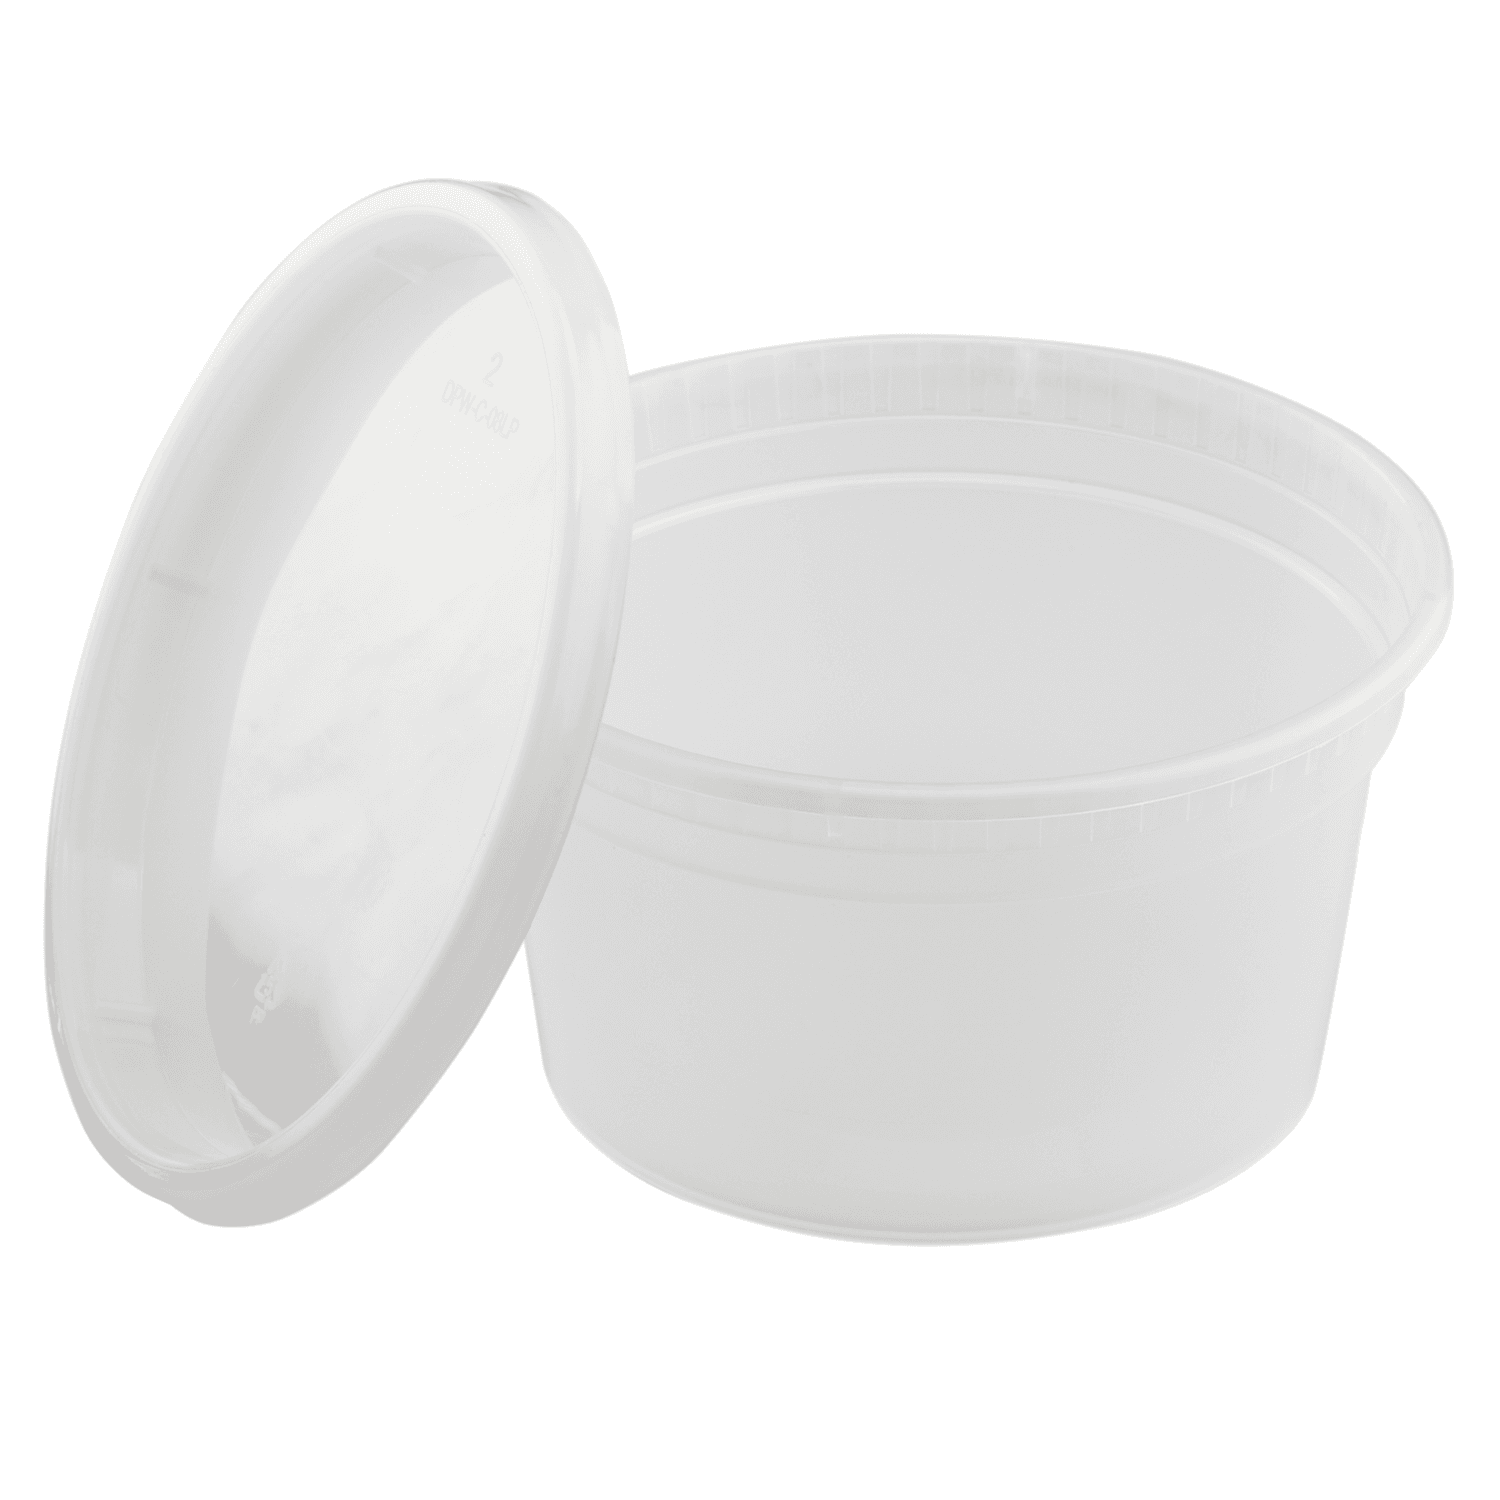 Karat 12oz PP Plastic Injection Molded Deli Containers with Lids - 240 sets